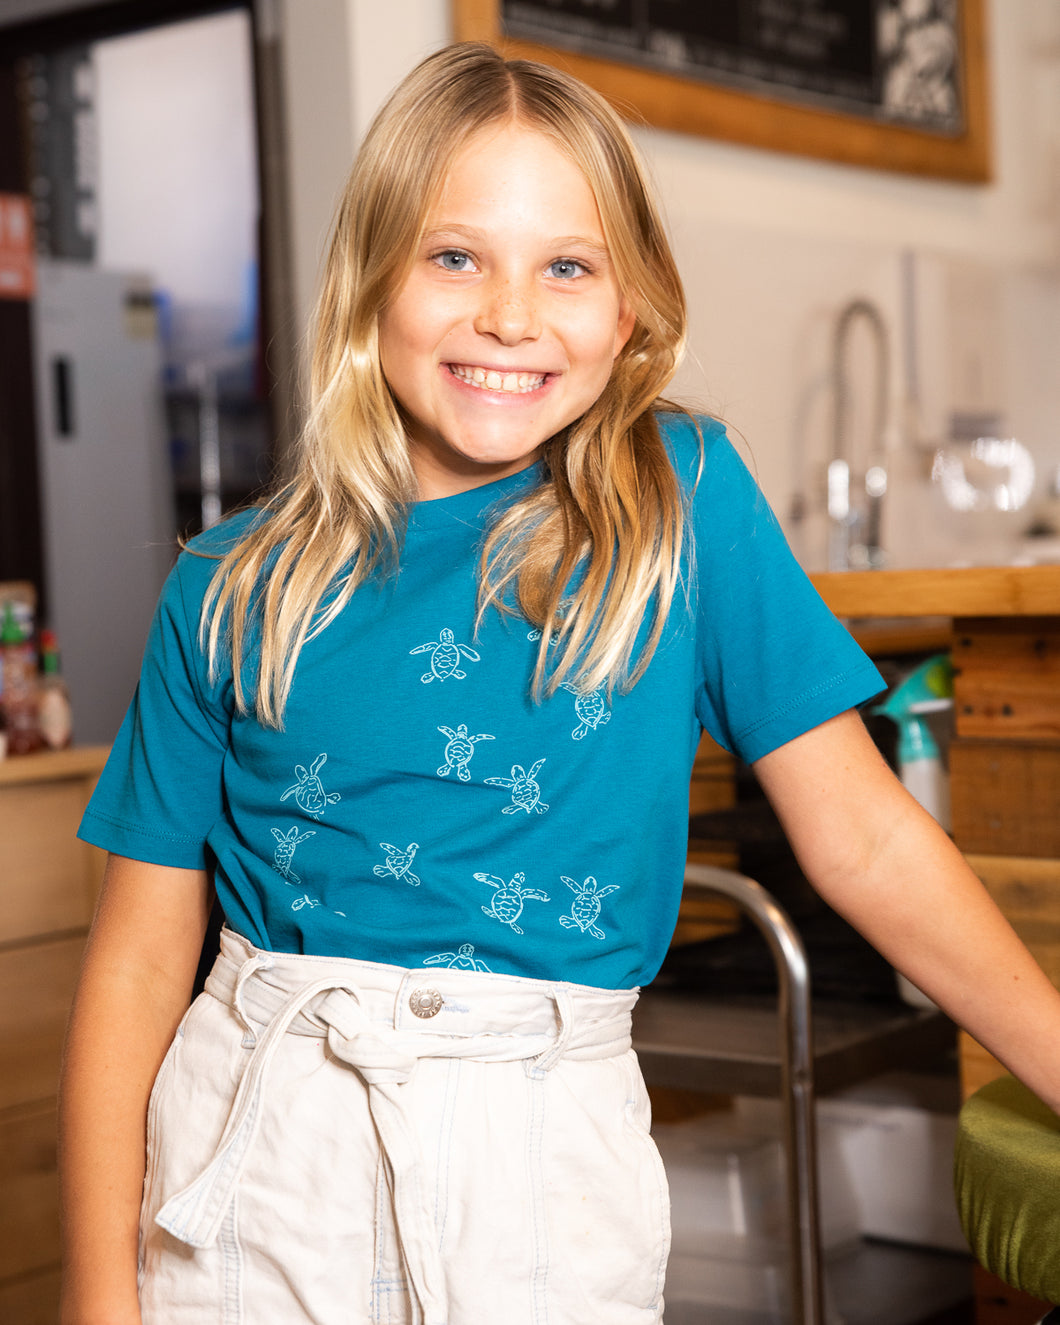 Young girl wearing blue organic cotton tshirt with turtle hatchlings on it.